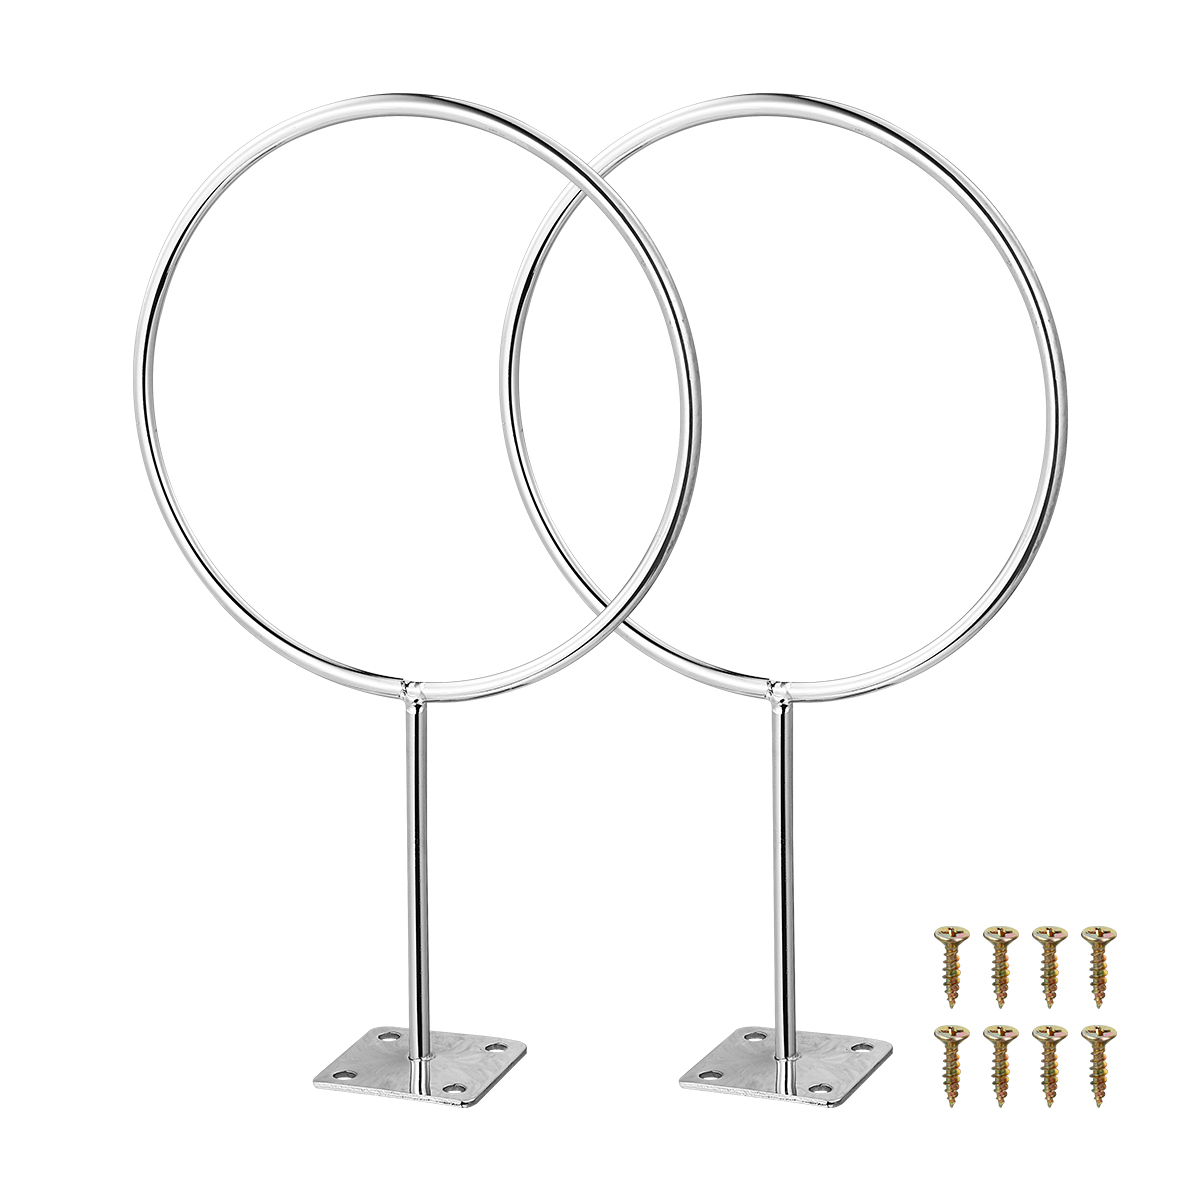 2PCS Stainless Steel Ball Storage Rack Sports Ball Rack for Basketball Soccer Volleyball